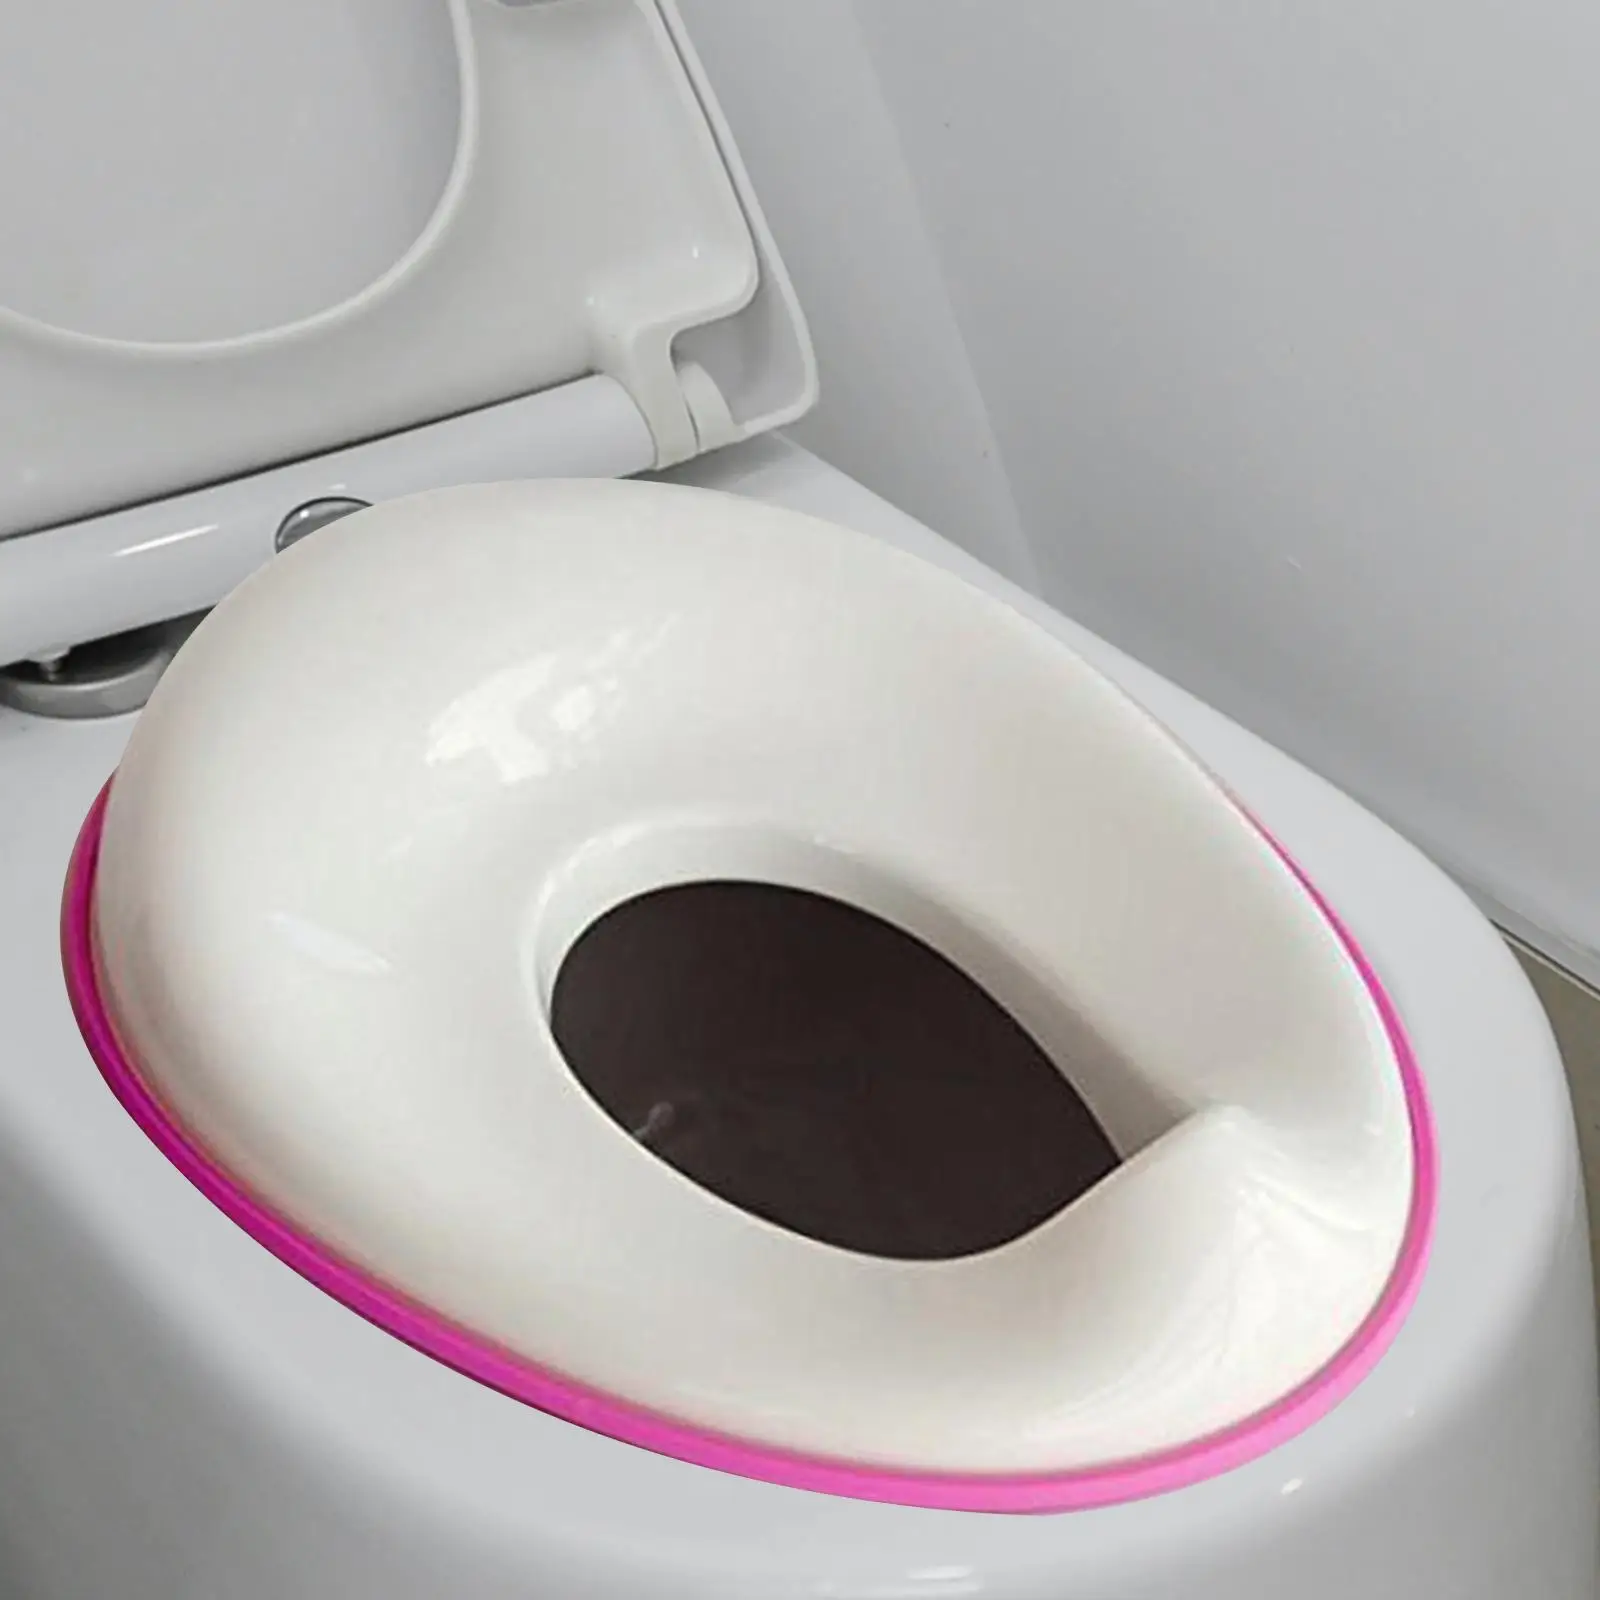 Toilet Training Seat Potty Seat Space Saving Fits Round & Oval Toilets Toilet Trainer